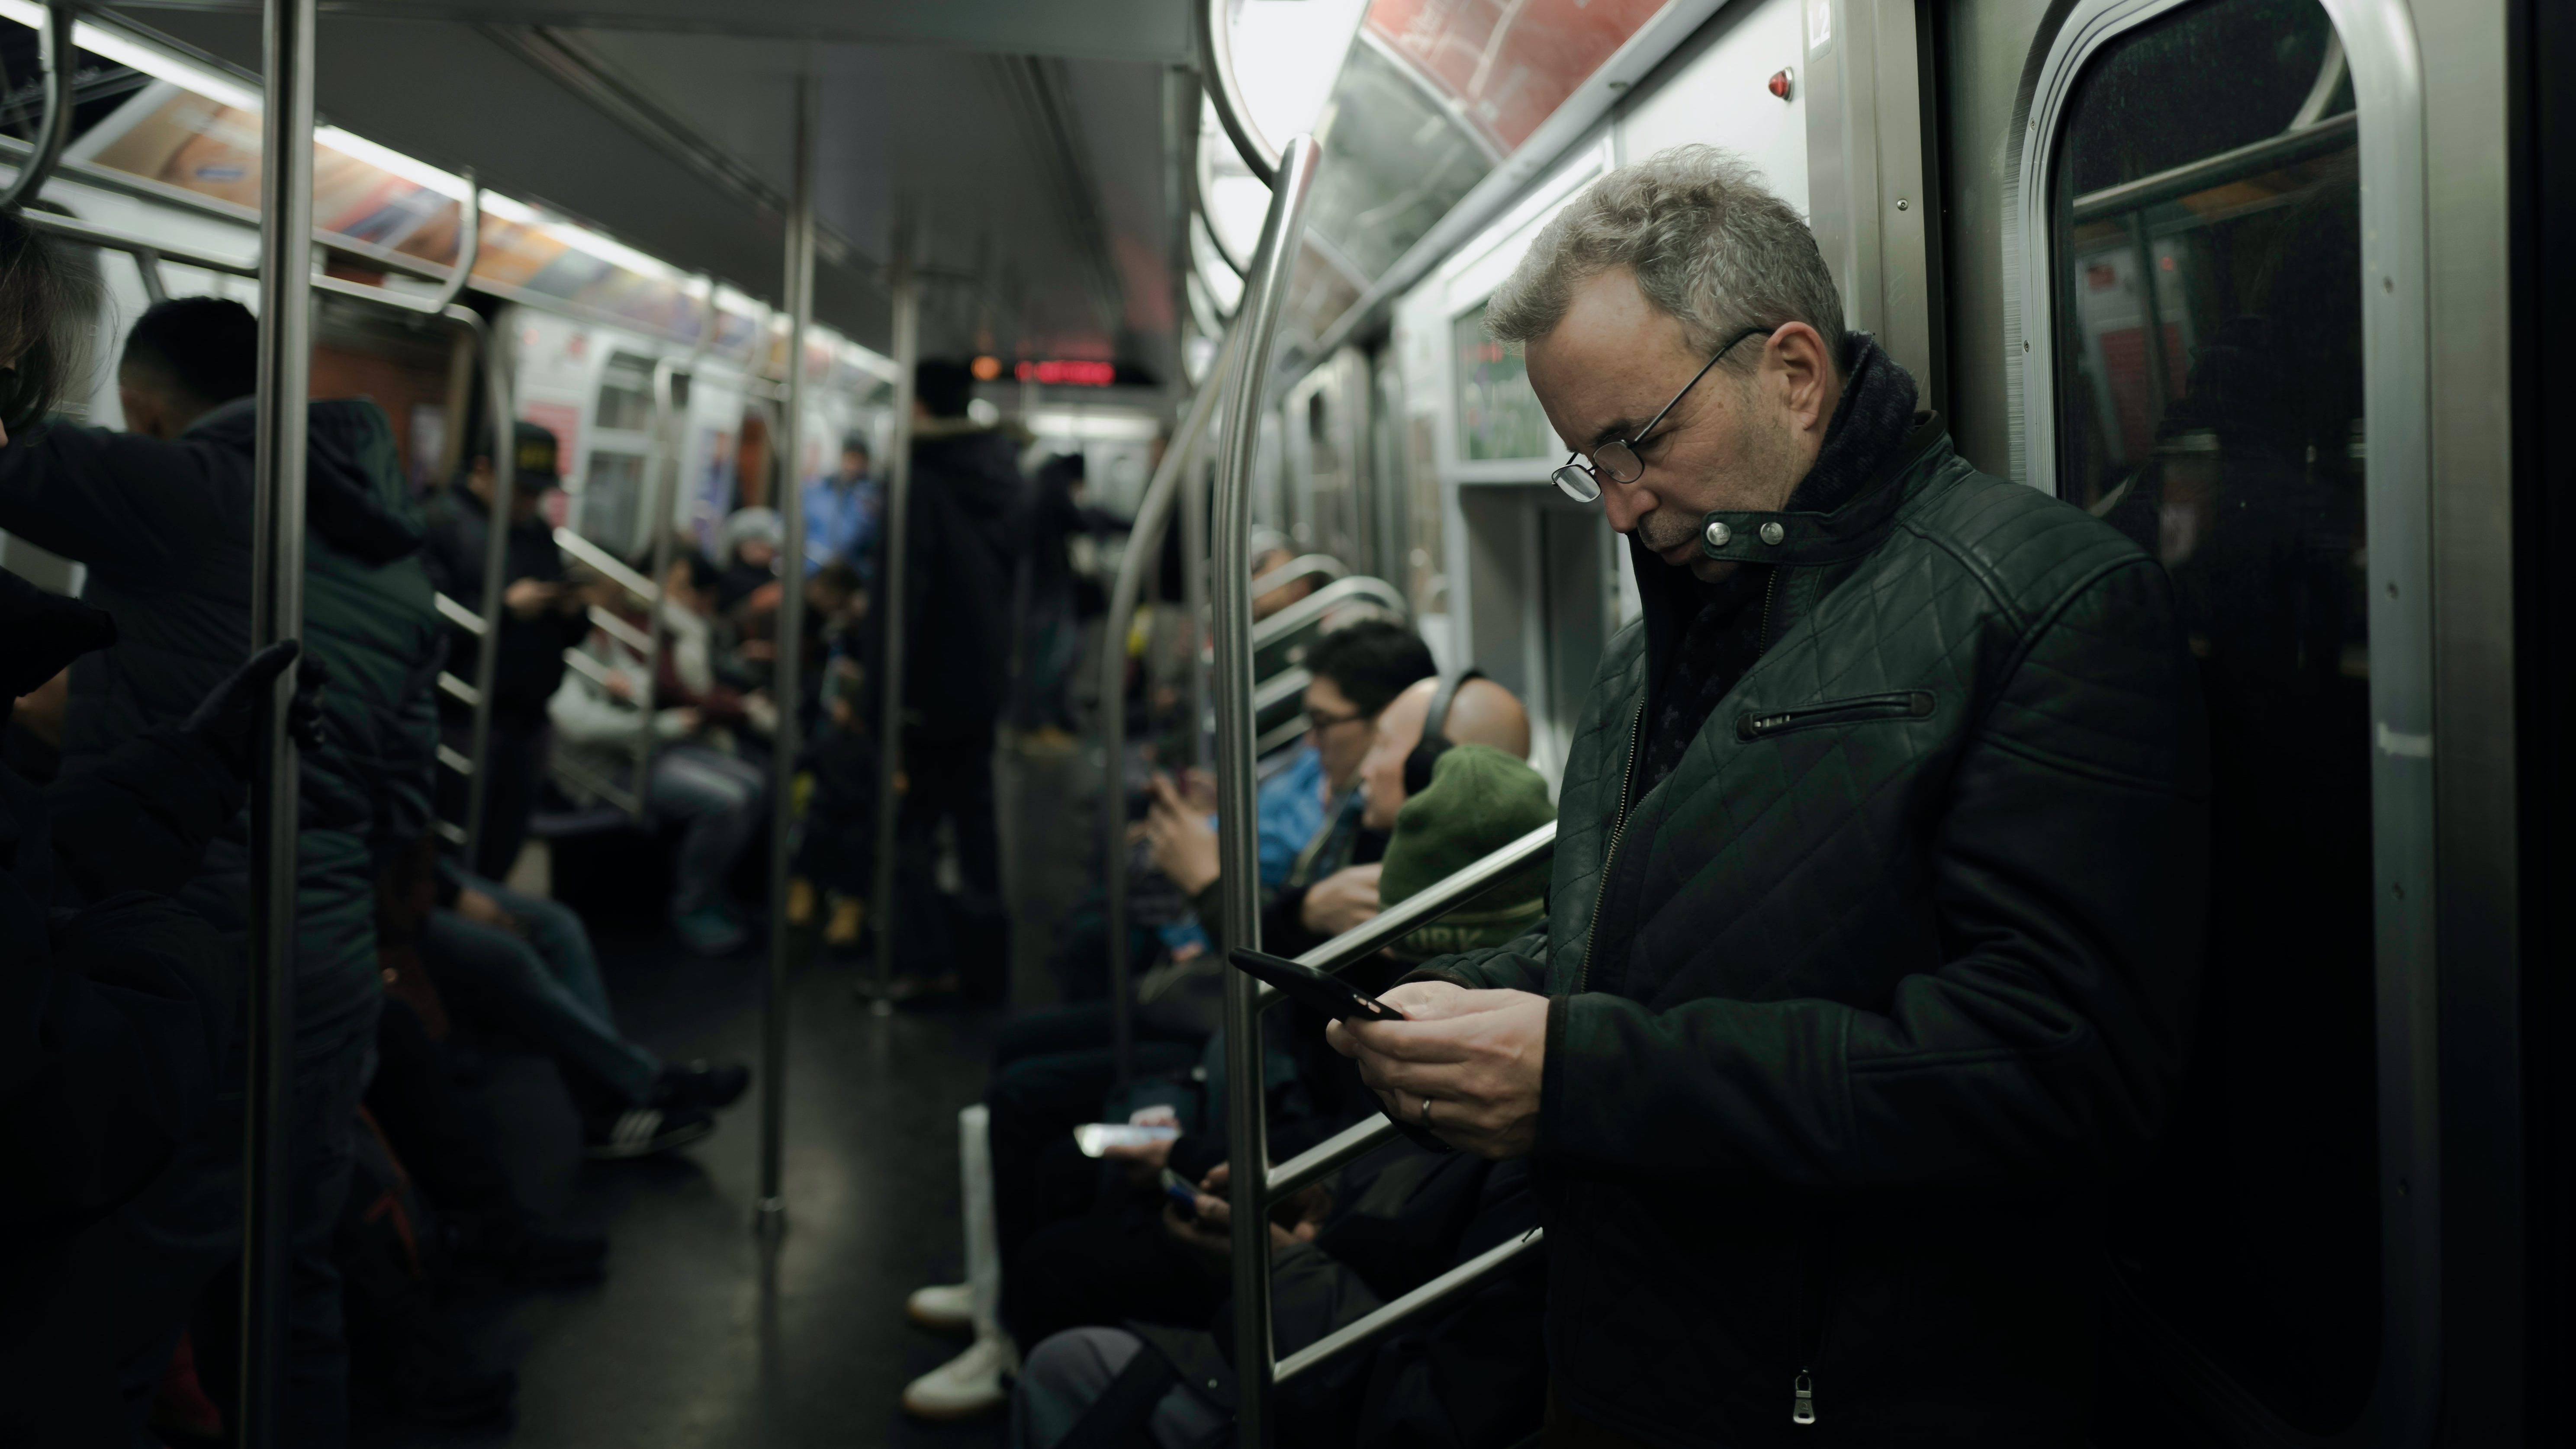 How well can contact tracing apps work in tricky situations like a crowded subway? 